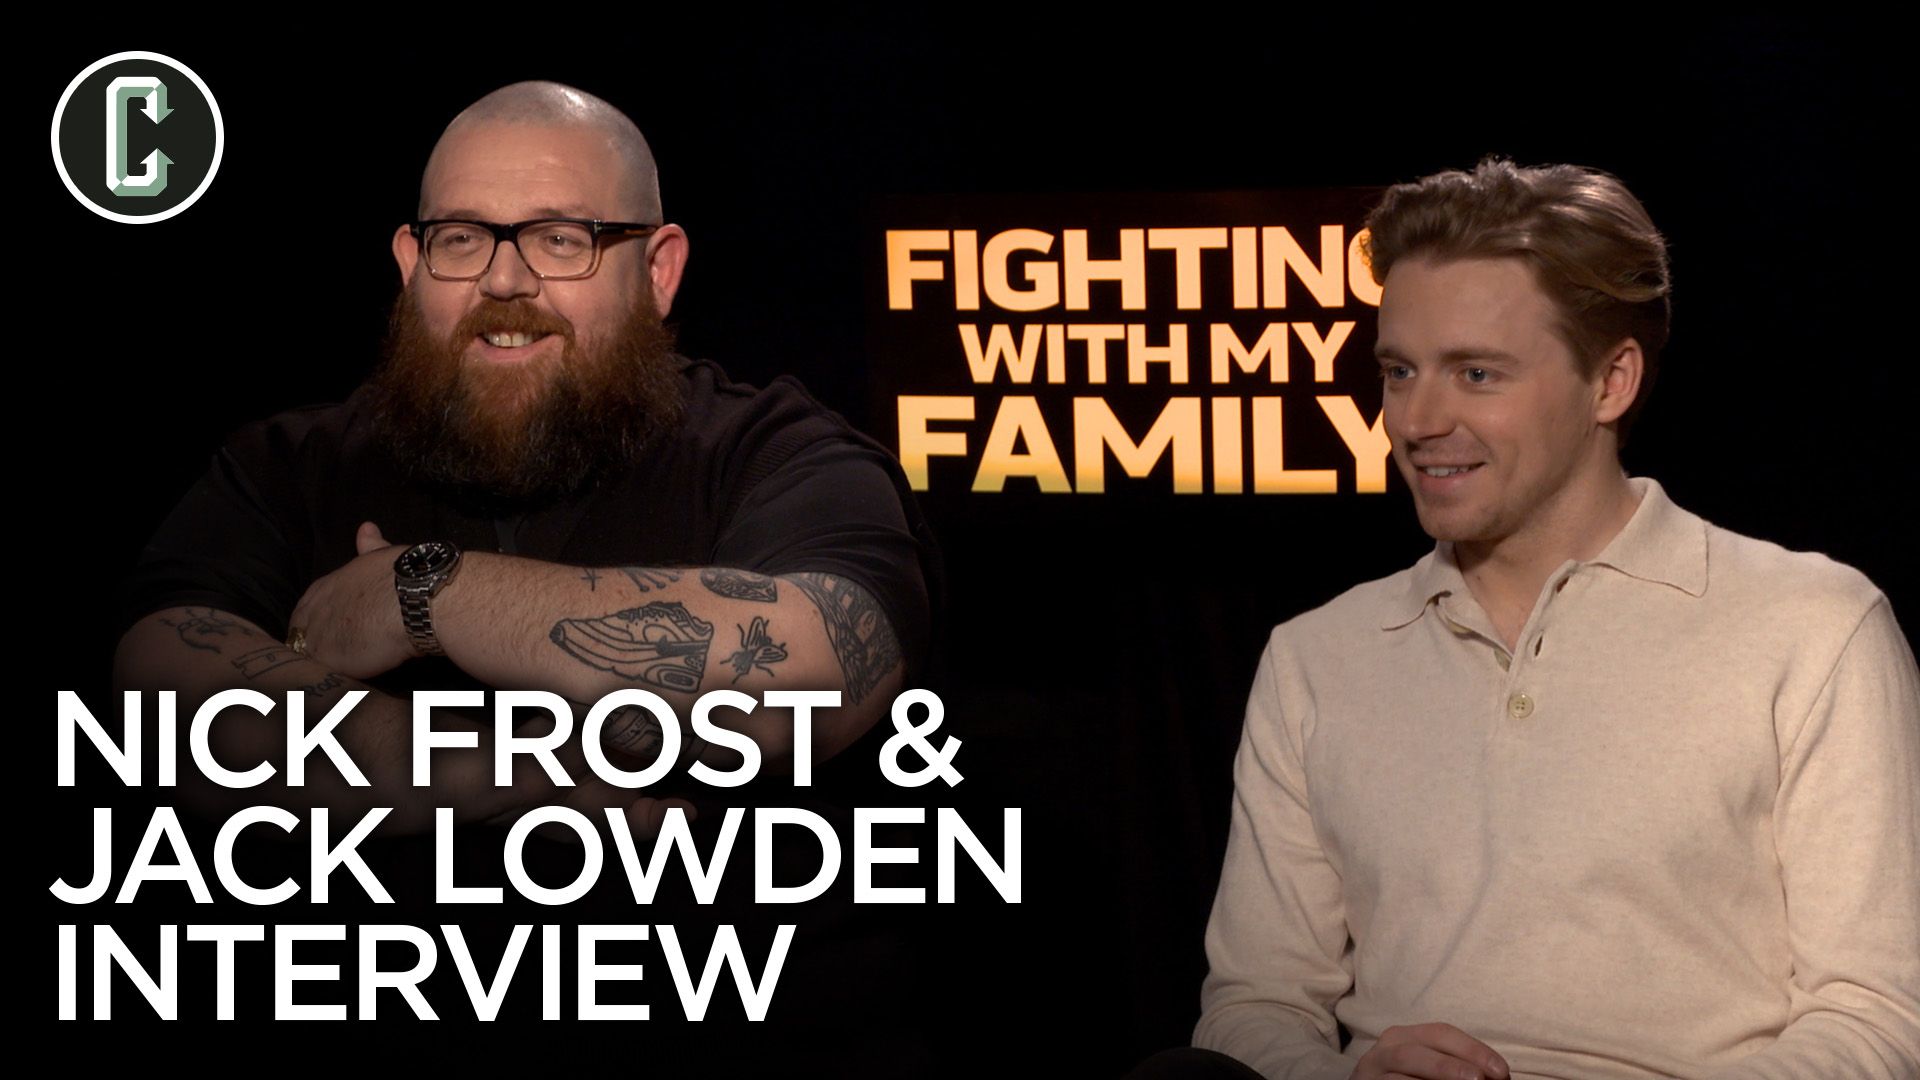 Nick Frost & Jack Lowden on Fighting With My Family and Stephen Merchant | Collider1920 x 1080